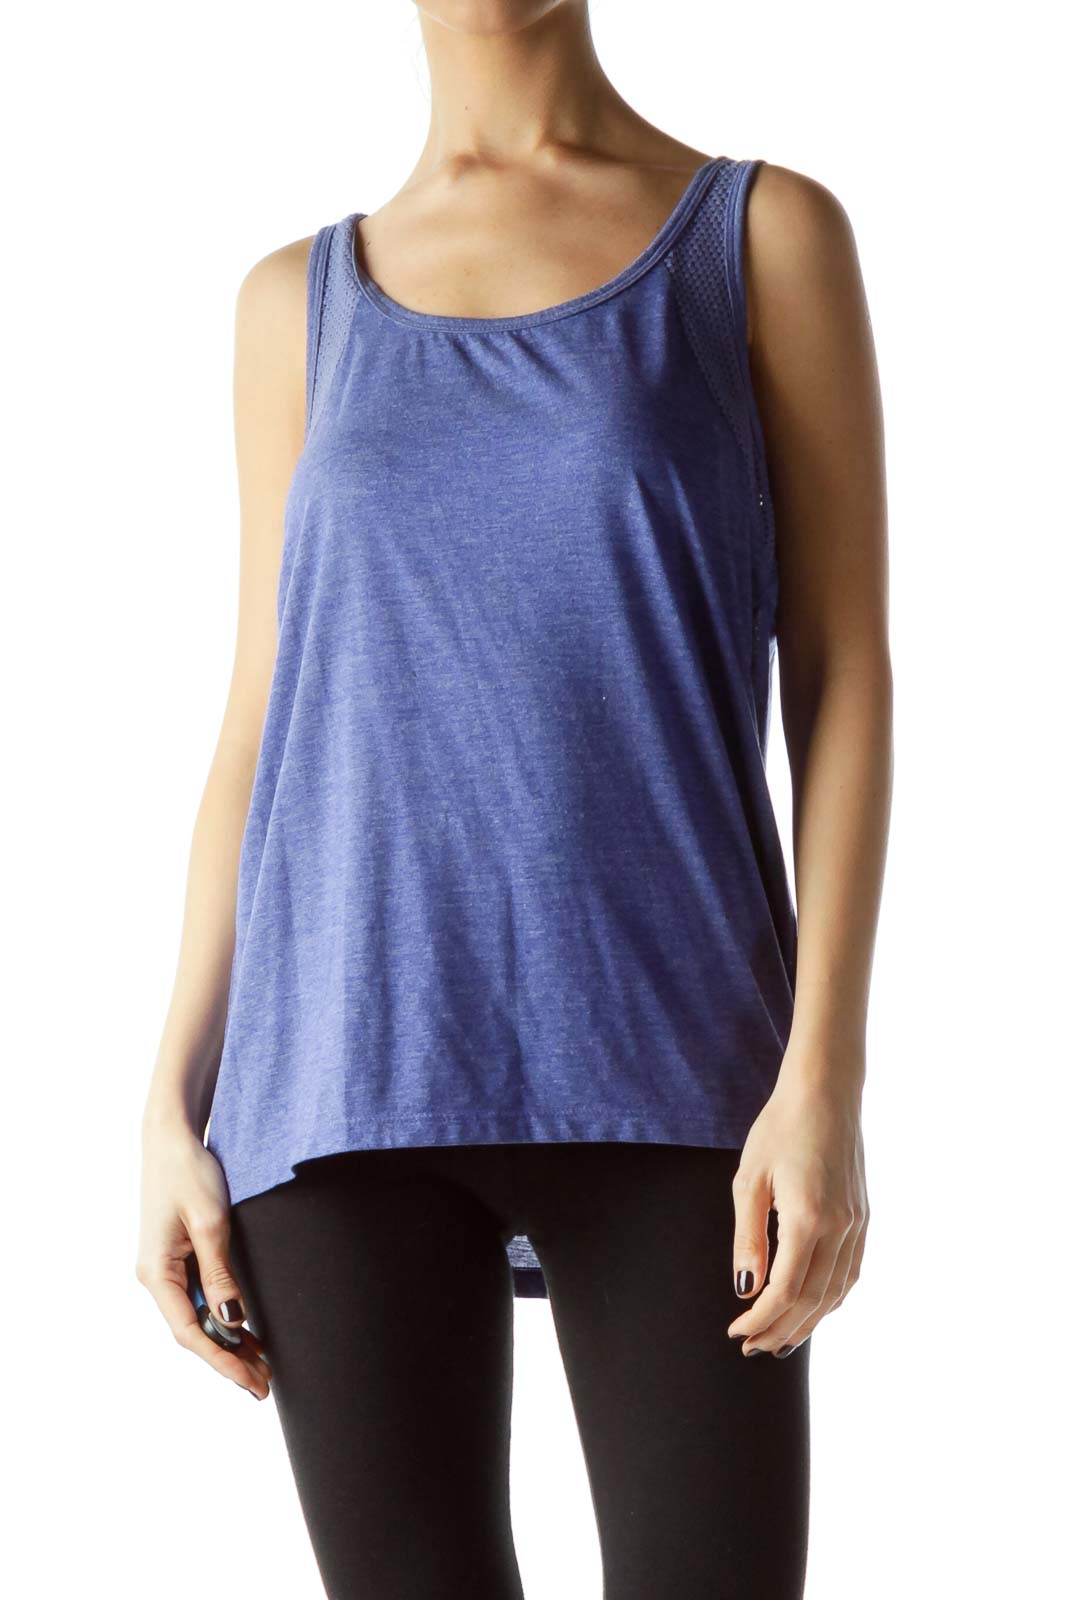 Blue Sleeveless Knit Cut-Out Design Yoga Top Front